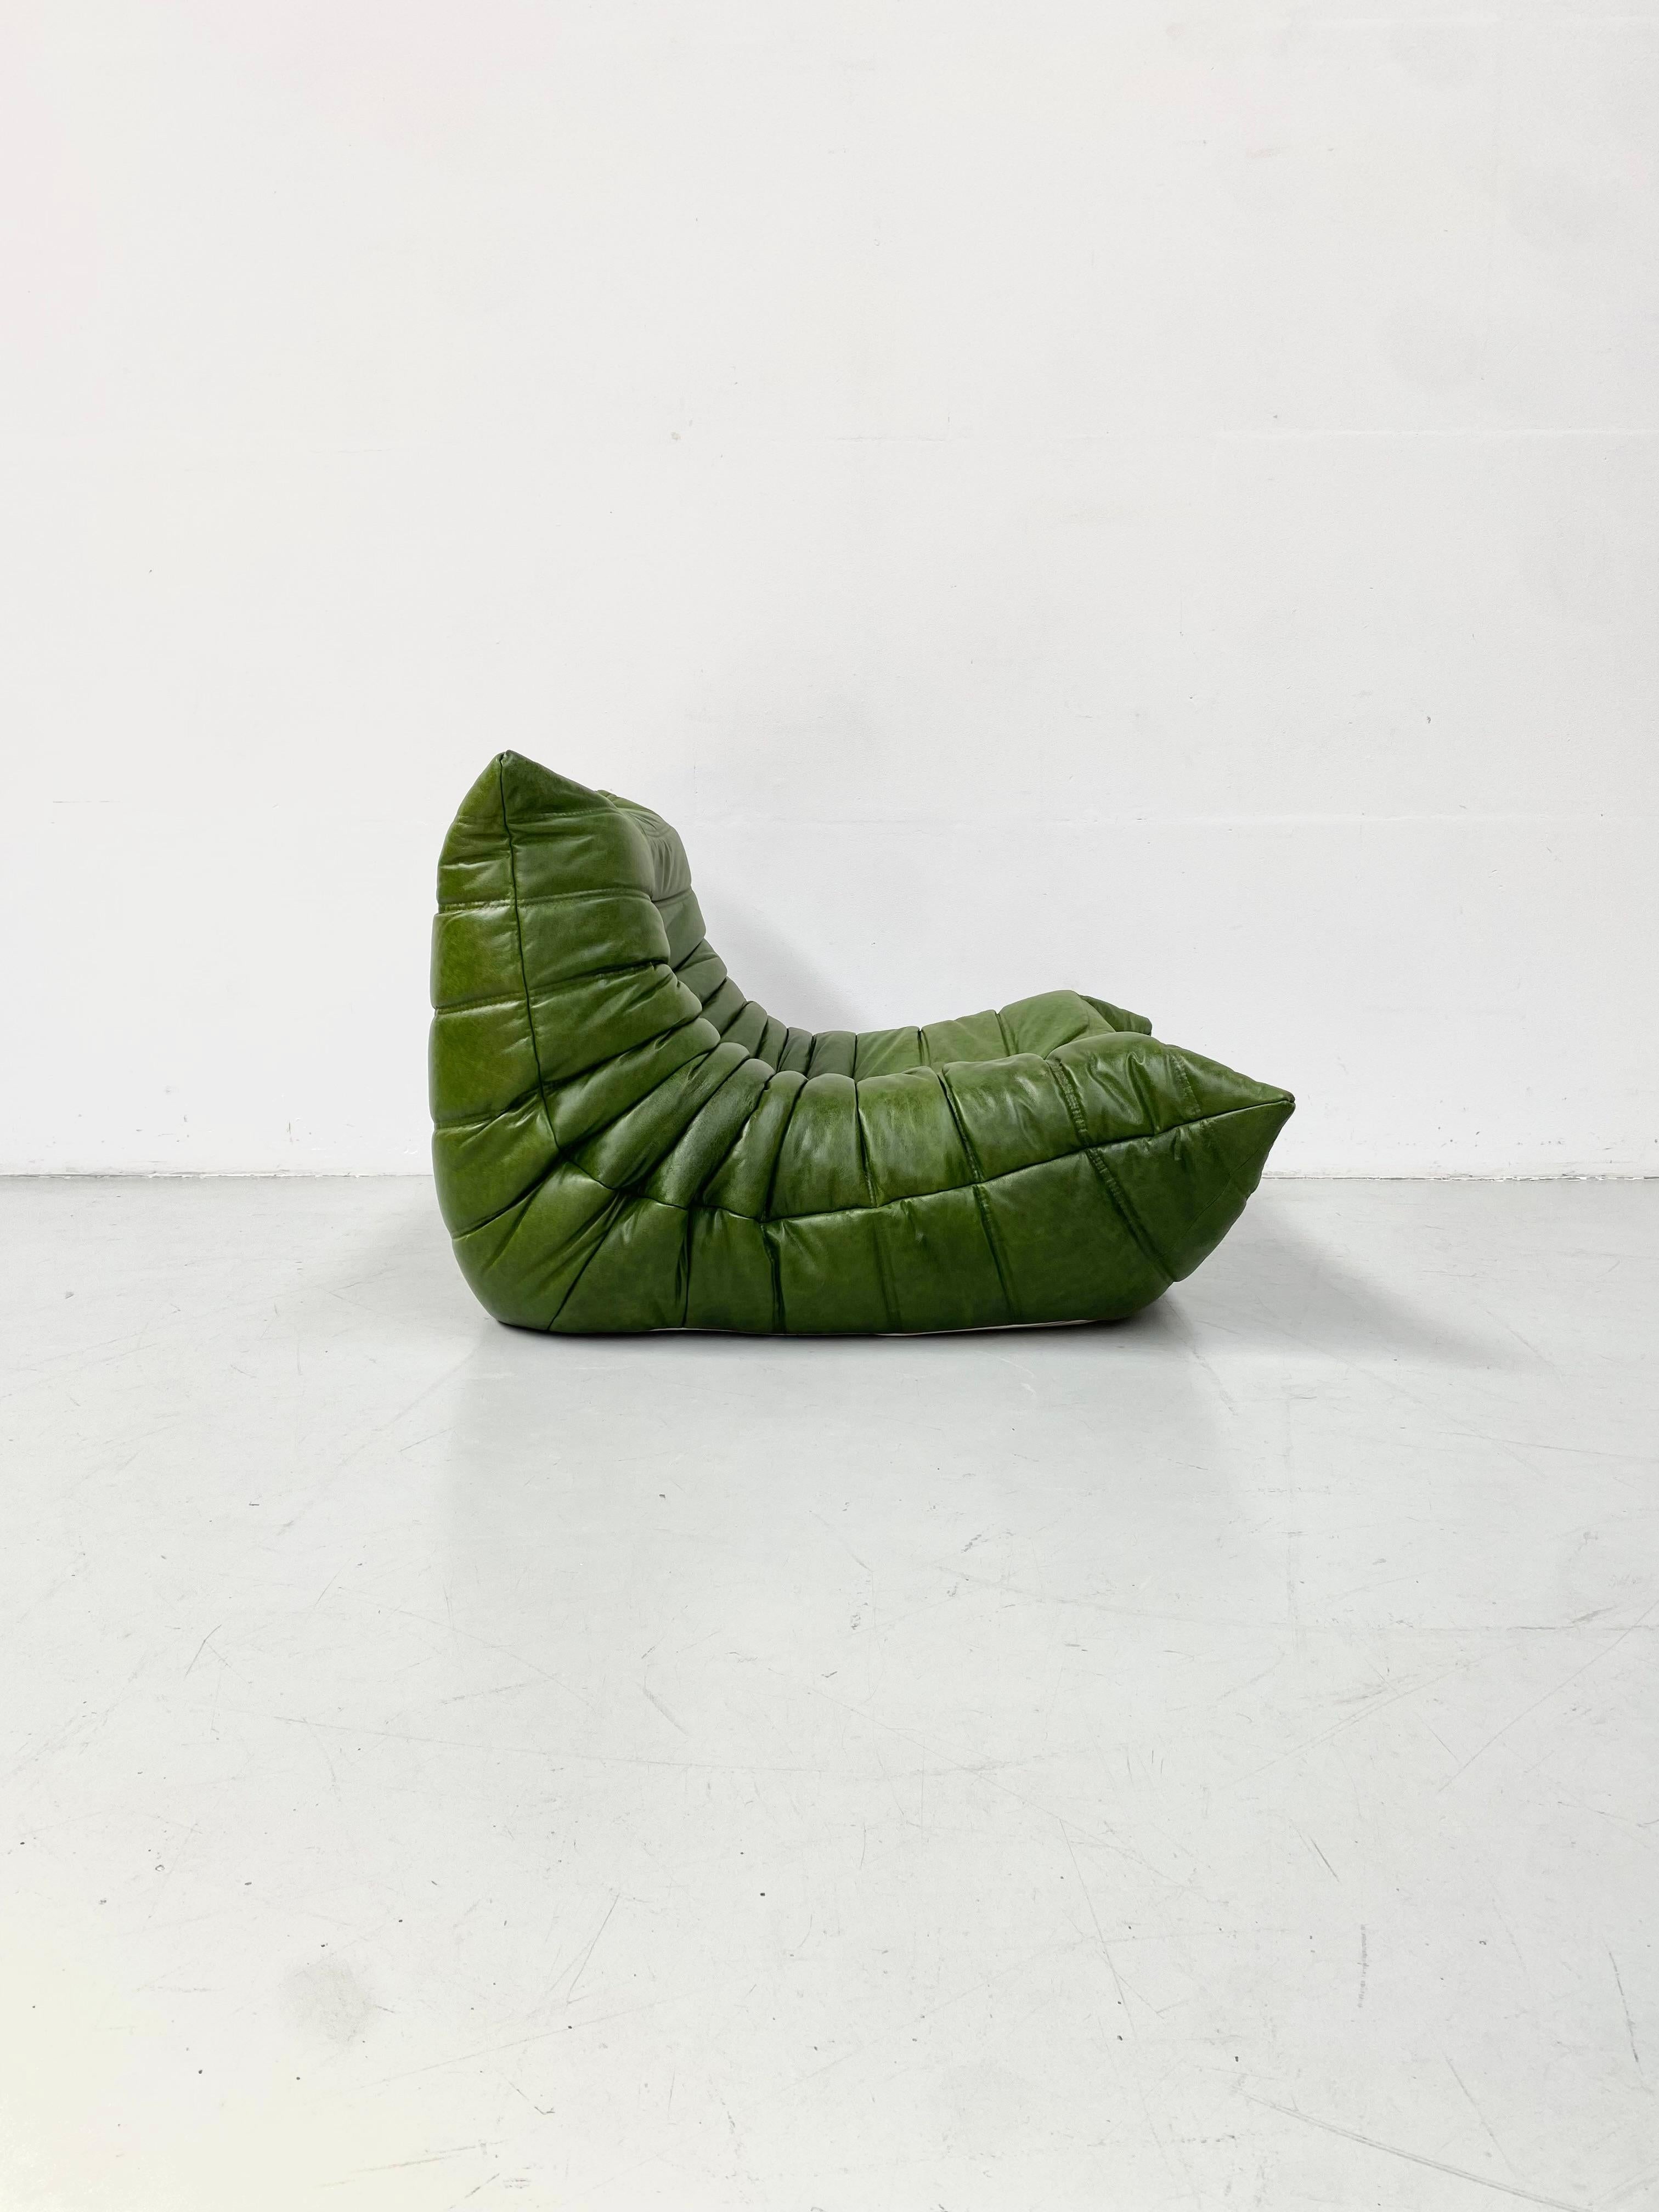 French Togo Chair in Green Leather by Michel Ducaroy for Ligne Roset, 1974. For Sale 1